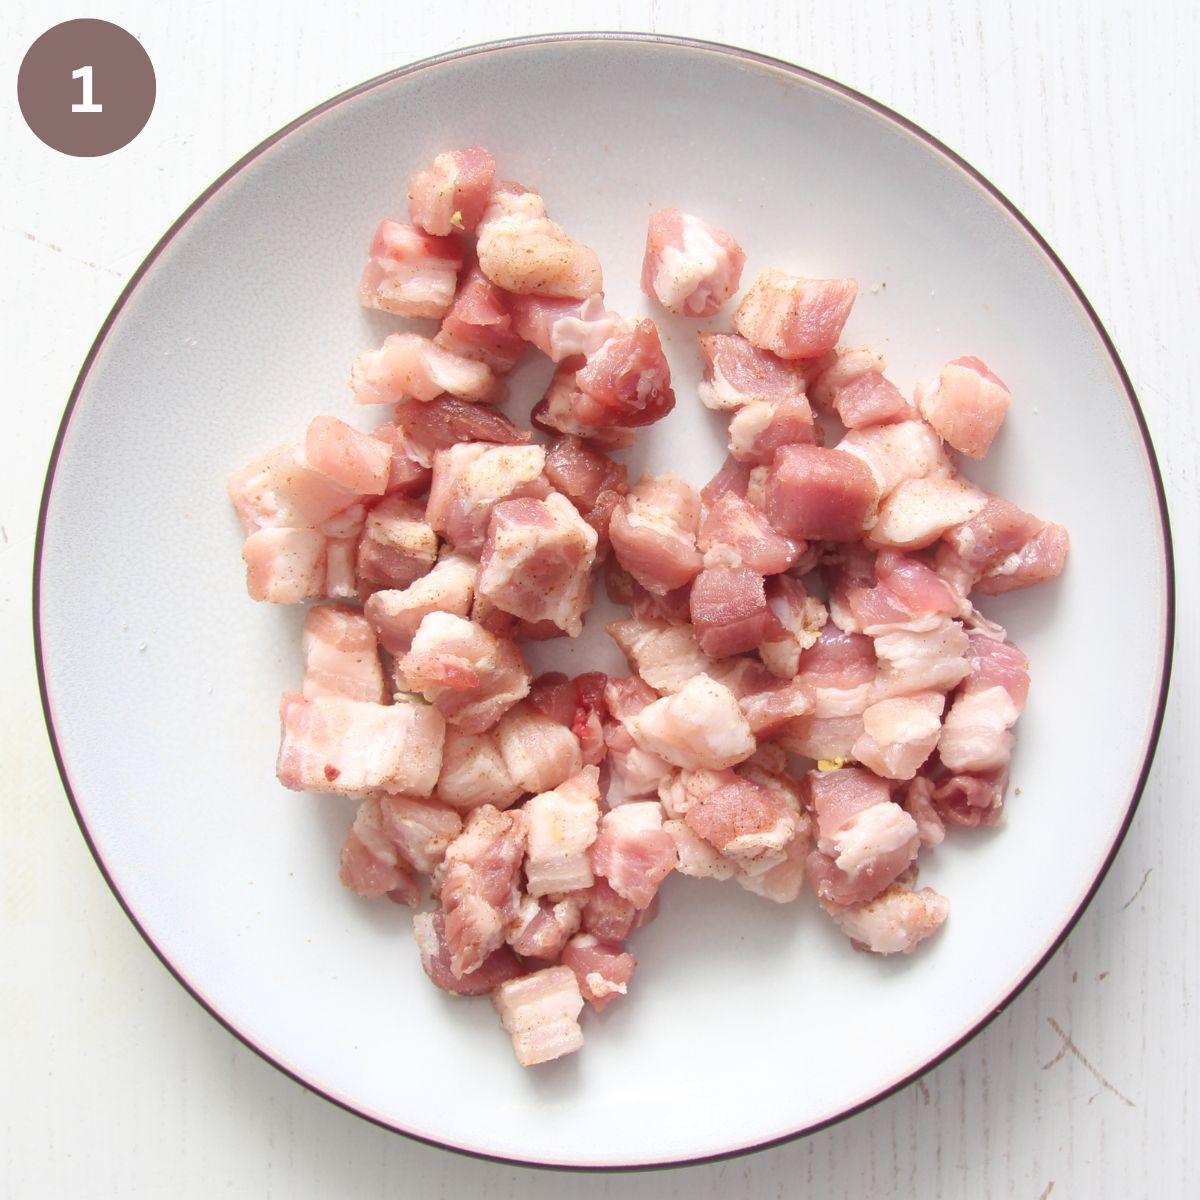 uncooked, chopped pork belly on a white plate.